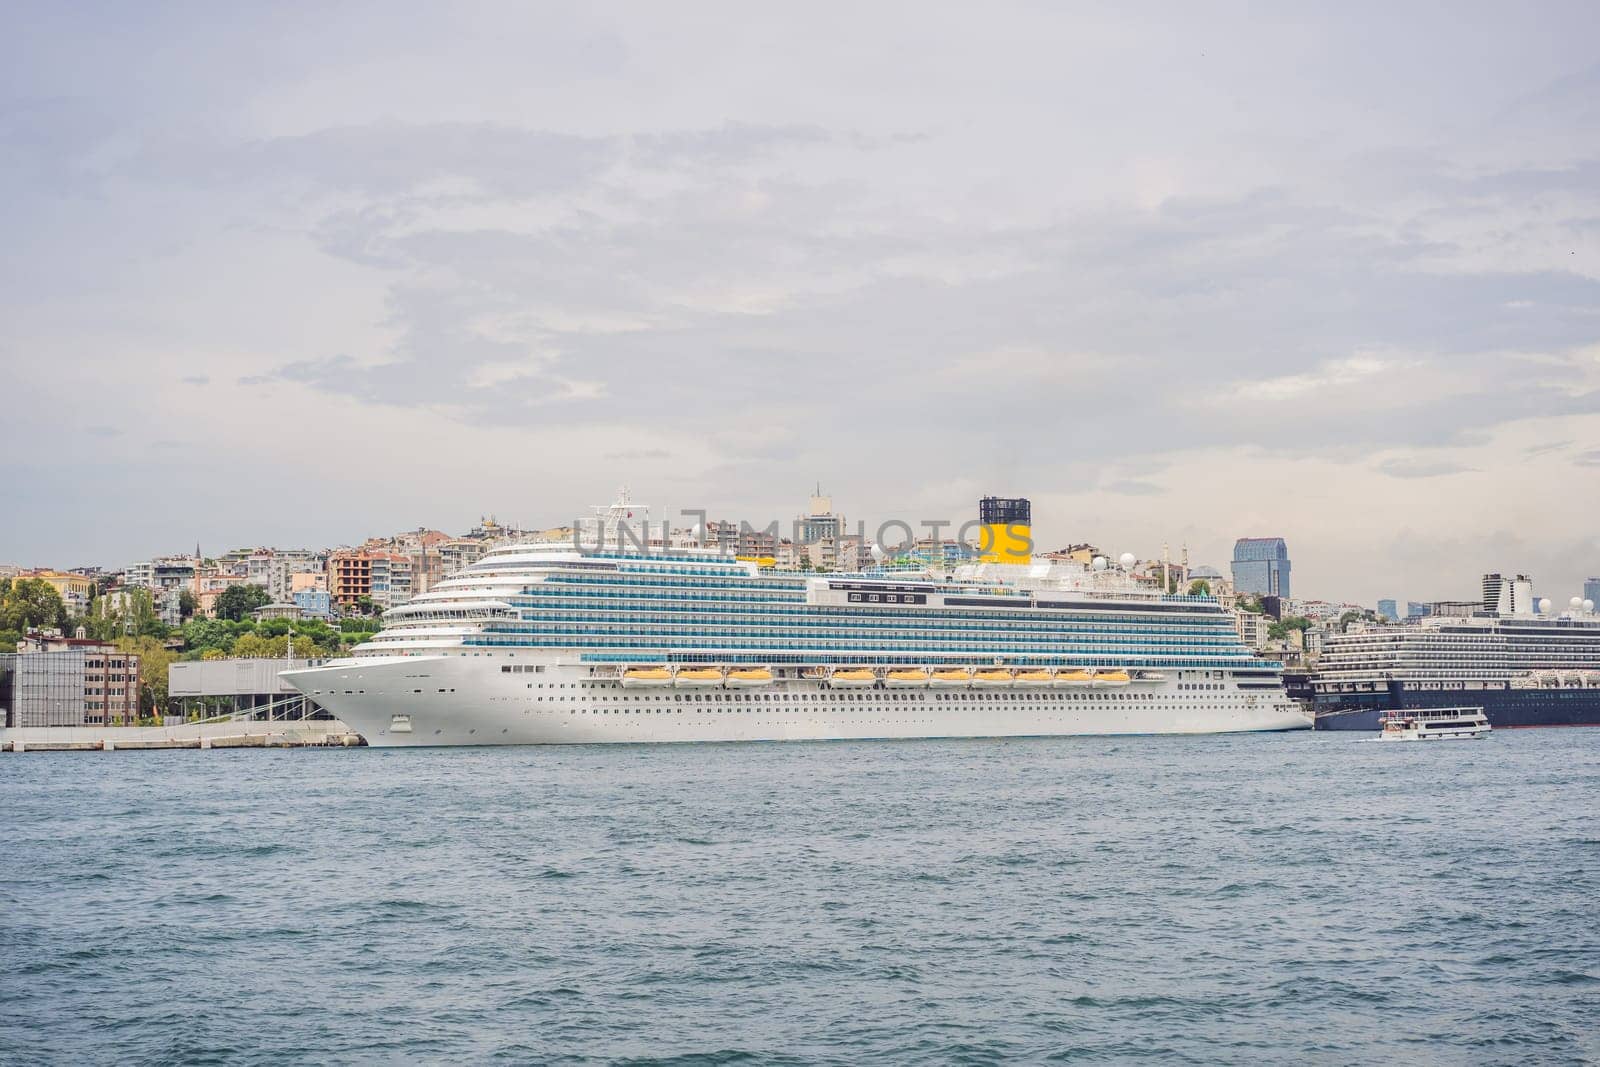 Huge cruise ship docked at terminal of Galataport, located along shore of Bosphorus strait, in Karakoy neighbourhood, with Galata tower in the background.